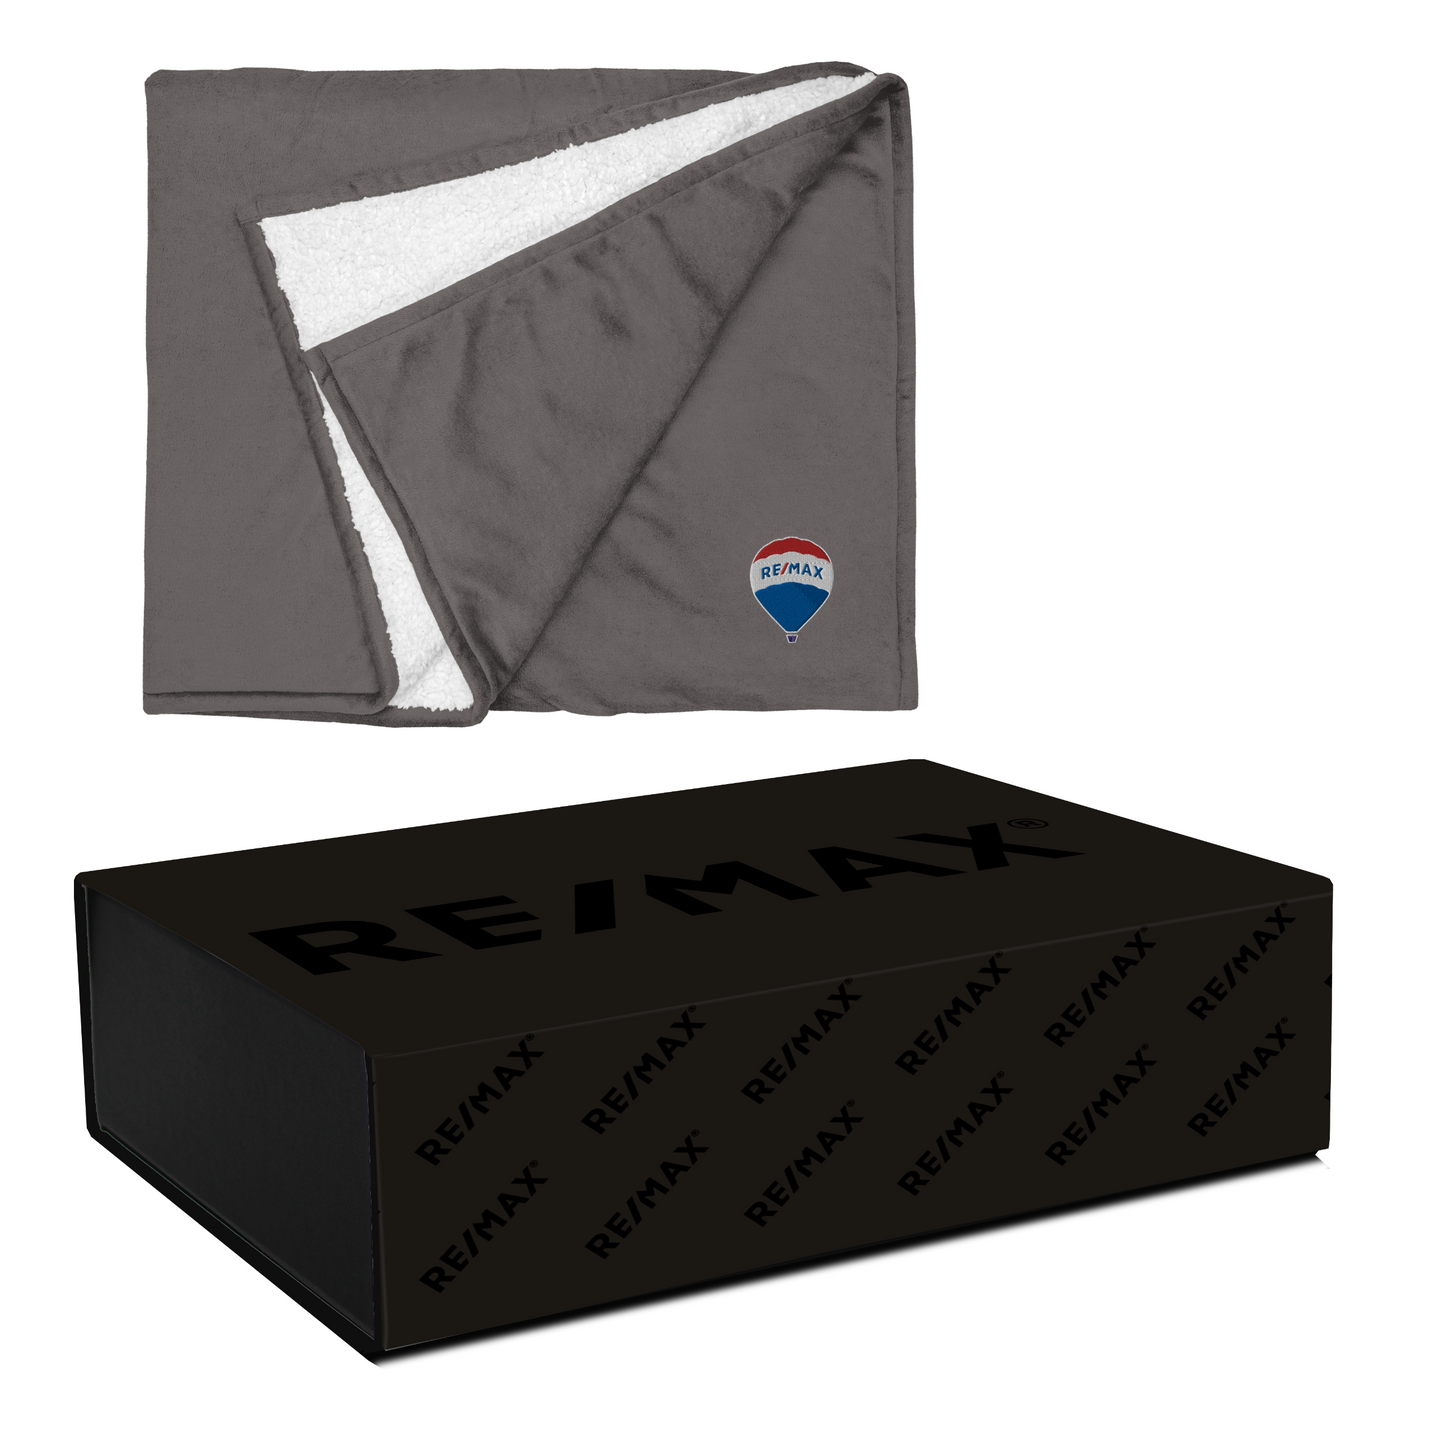 RE/MAX Branded Closing Gift Box with RE/MAX Branded Blanket